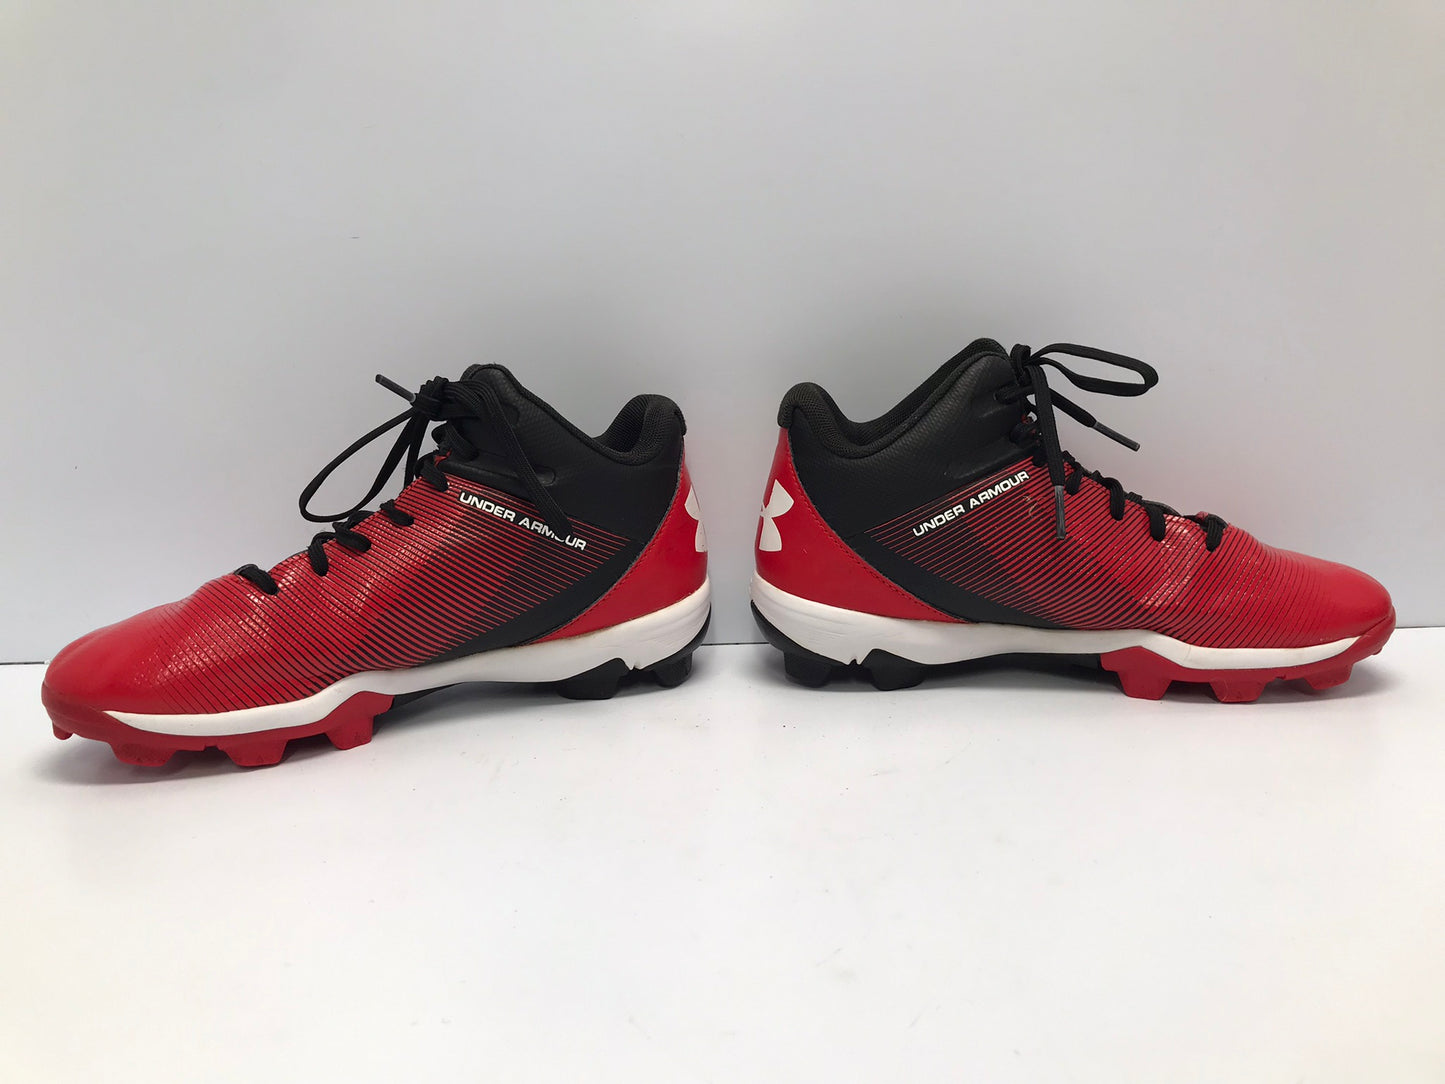 Baseball Shoes Cleats Child Size 4 Under Armour High Top Red Black Excellent